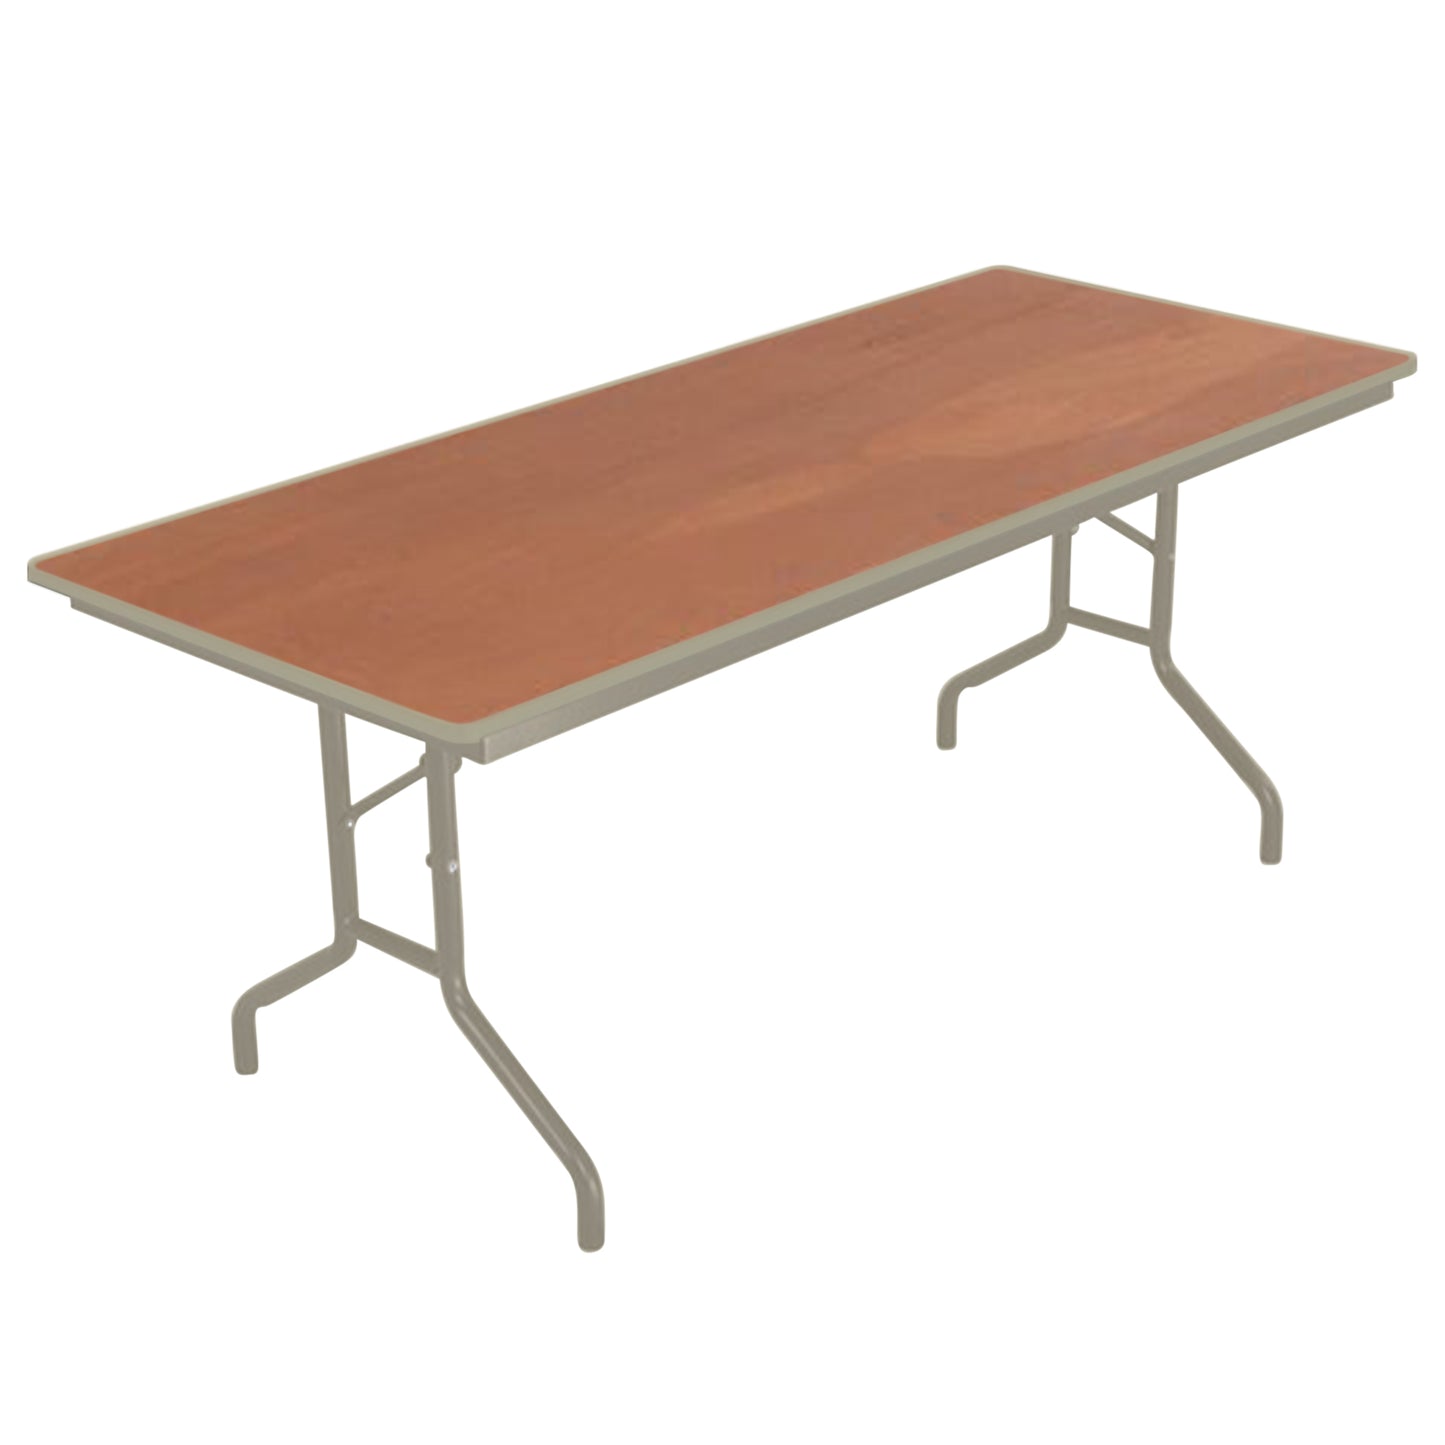 AmTab Folding Table - Plywood Stained and Sealed - Vinyl T-Molding Edge - 18"W x 72"L x 29"H  (AmTab AMT-186PM)